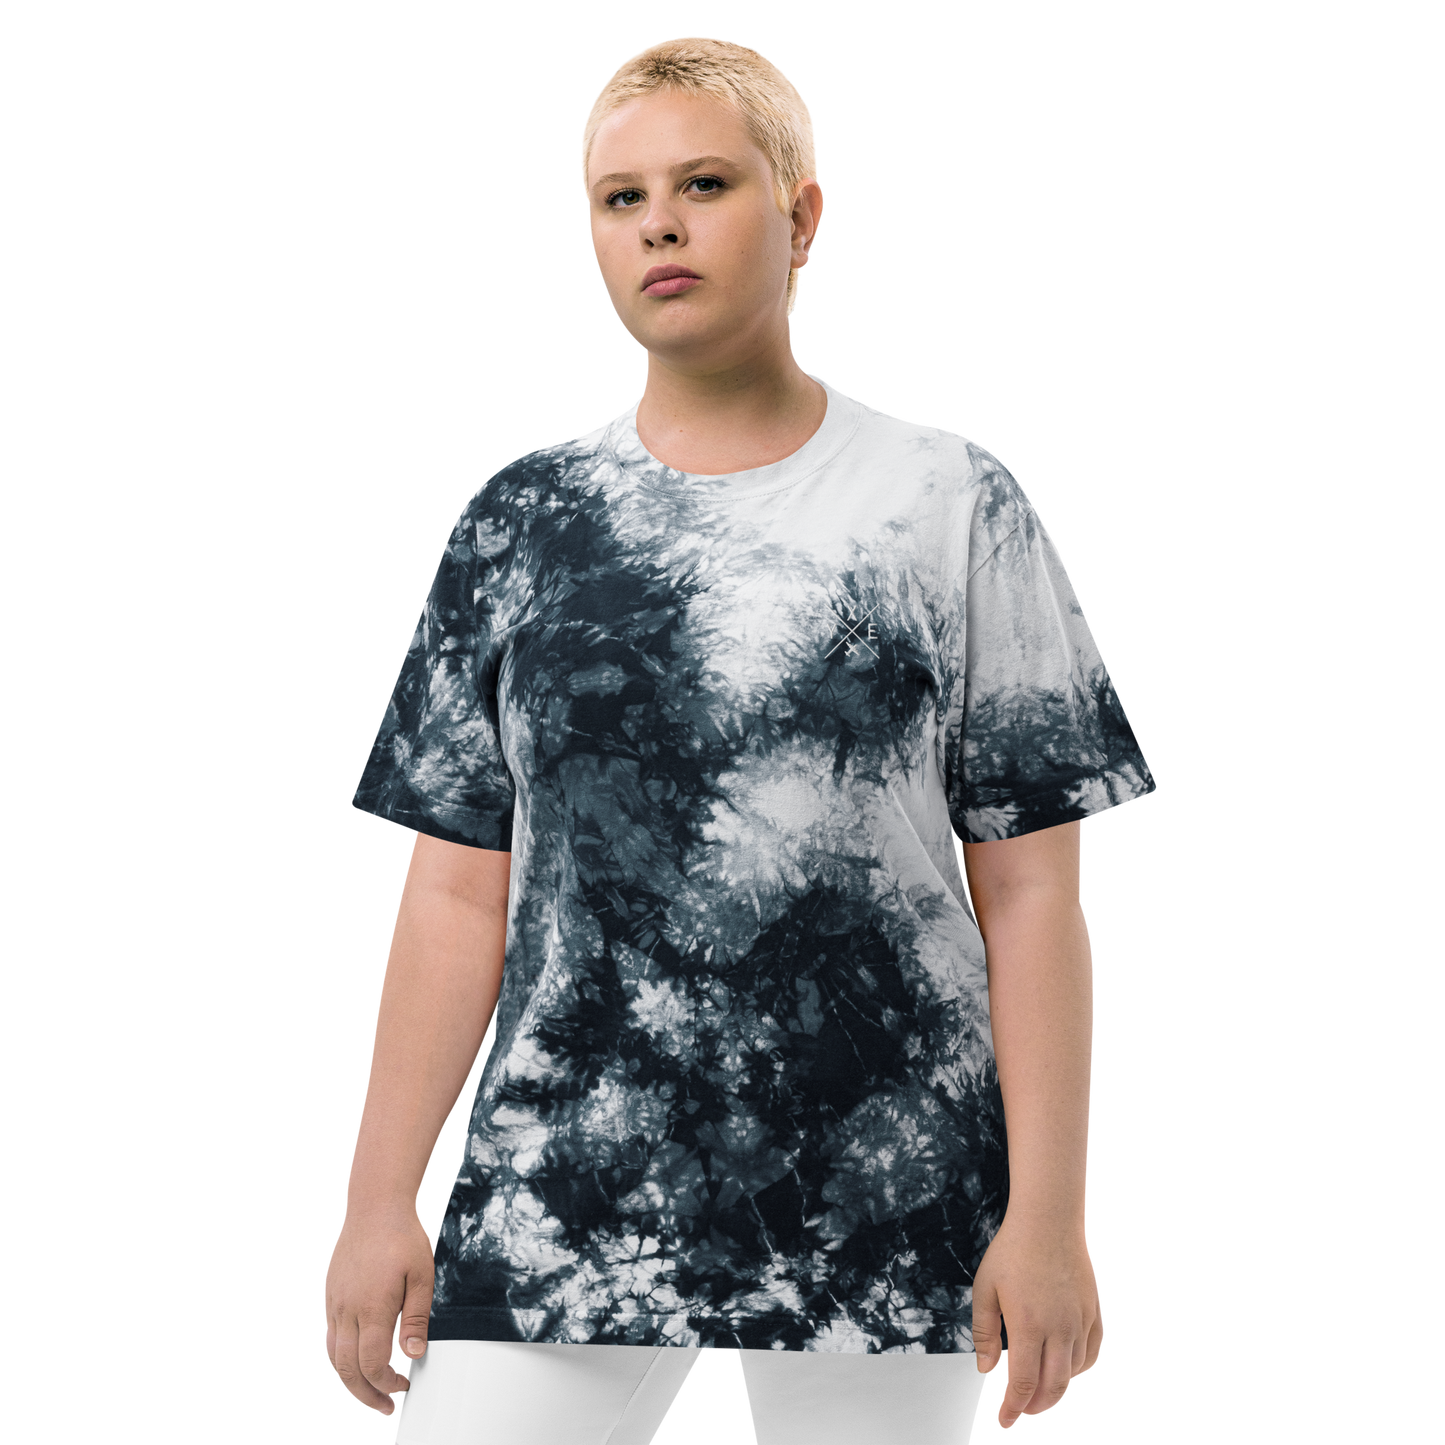 YHM Designs - YXE Saskatoon Oversized Tie-Dye T-Shirt - Crossed-X Design with Airport Code and Vintage Propliner - White Embroidery - Image 16